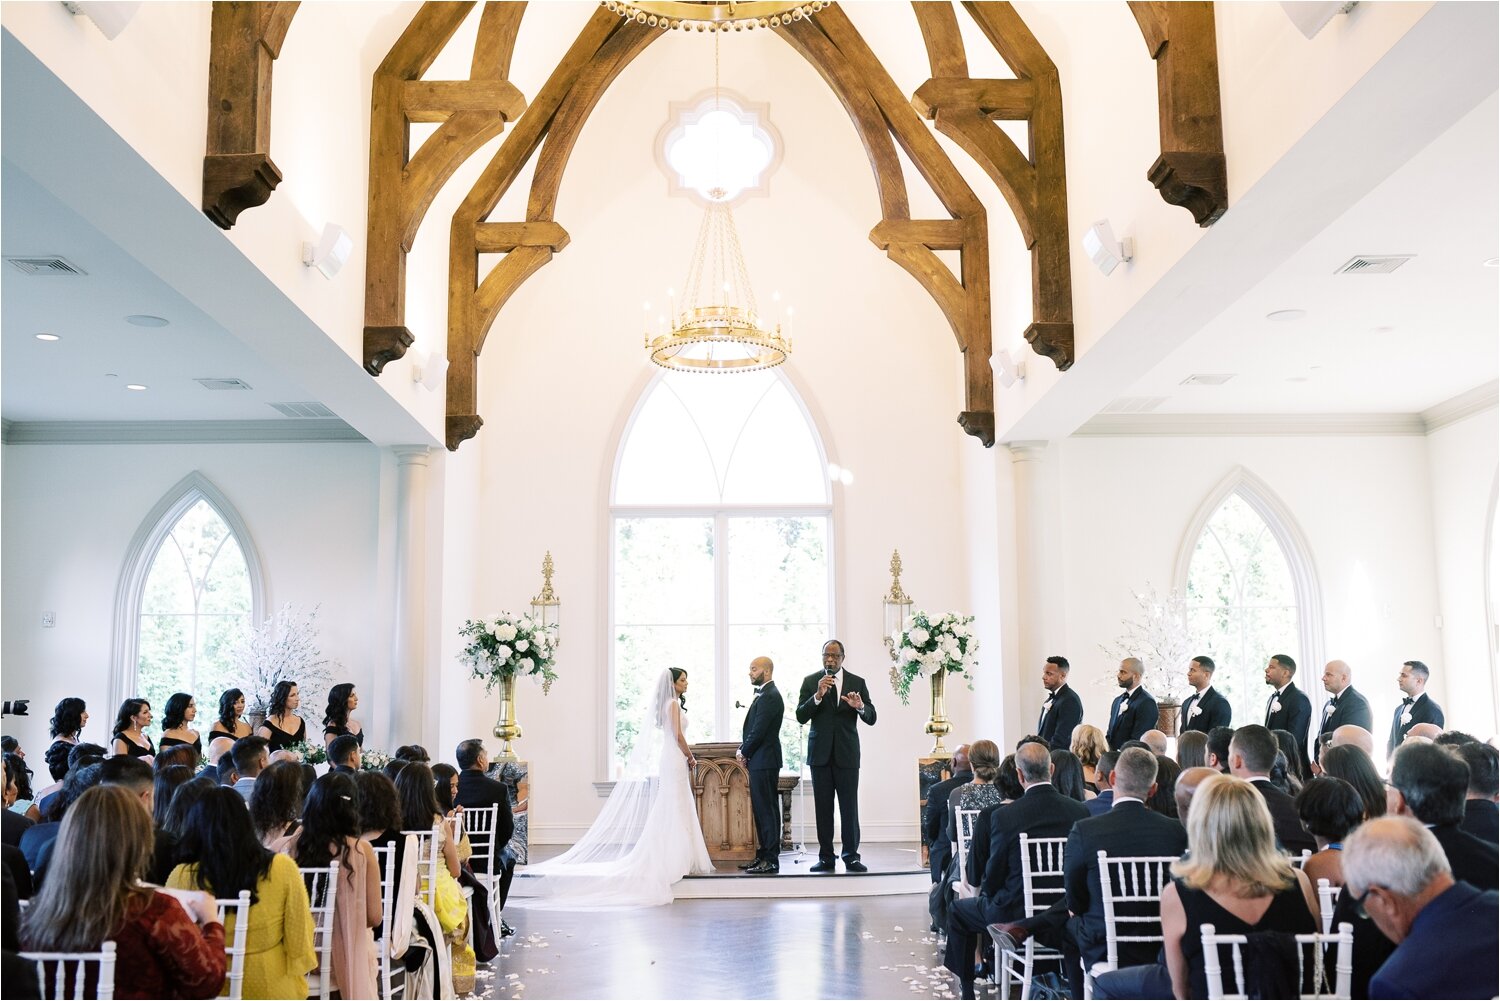 Wedding Ceremony at The Chapel at The Park Chateau